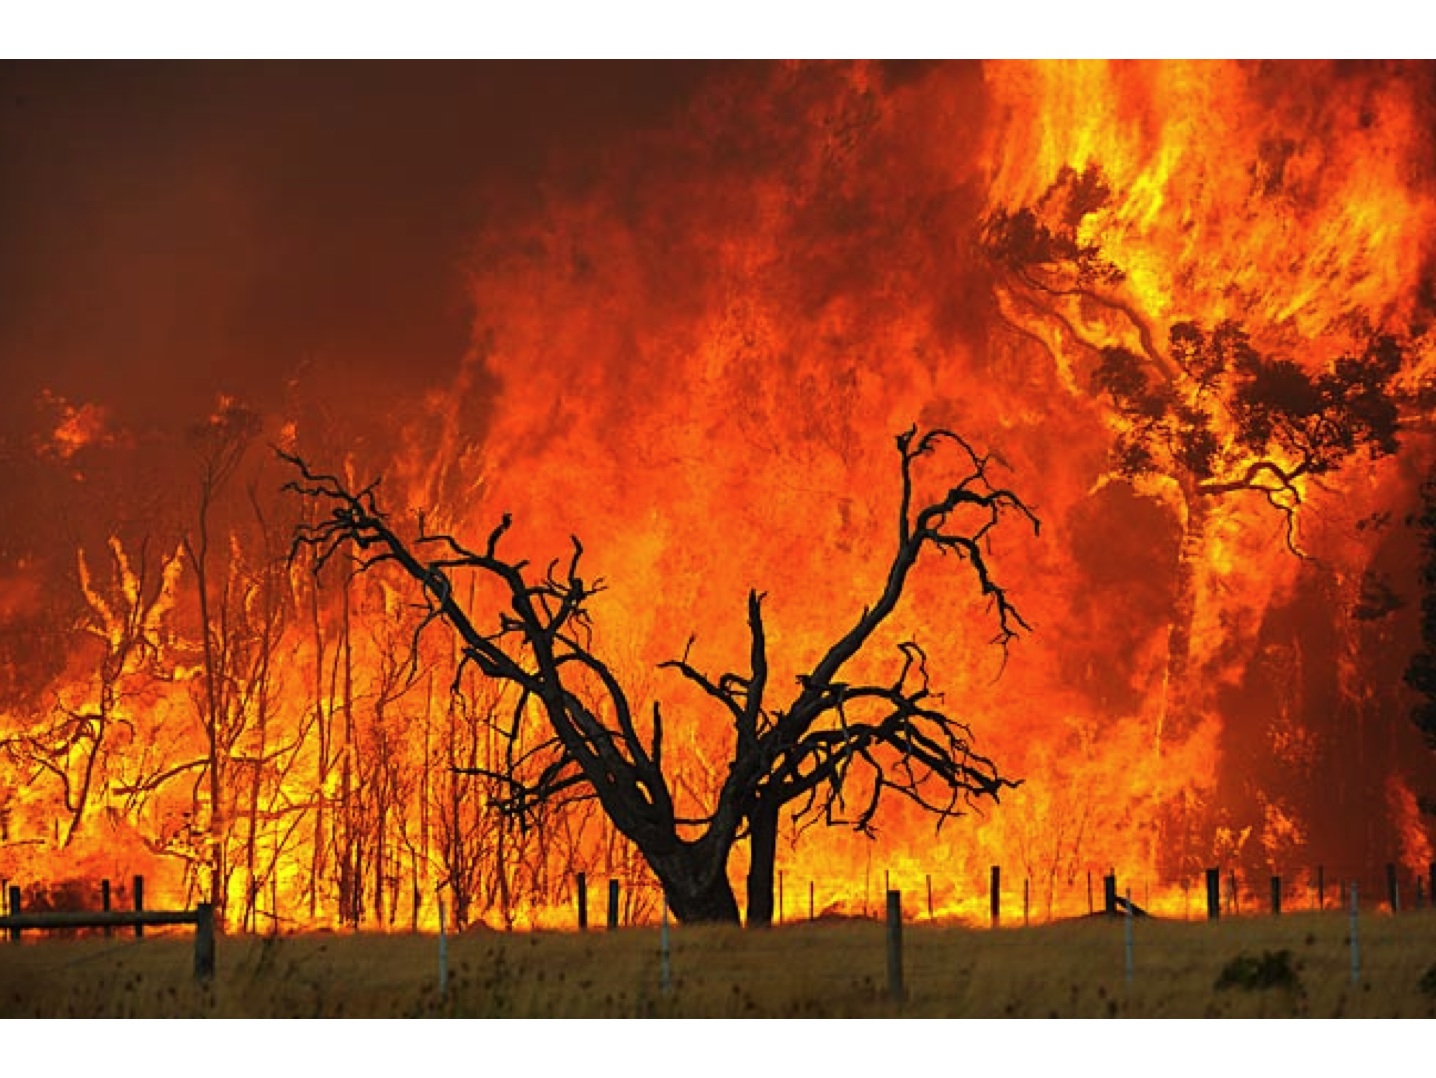 Earthbag domes are more fire resistant and safer in brush fires such as this one in Australia.